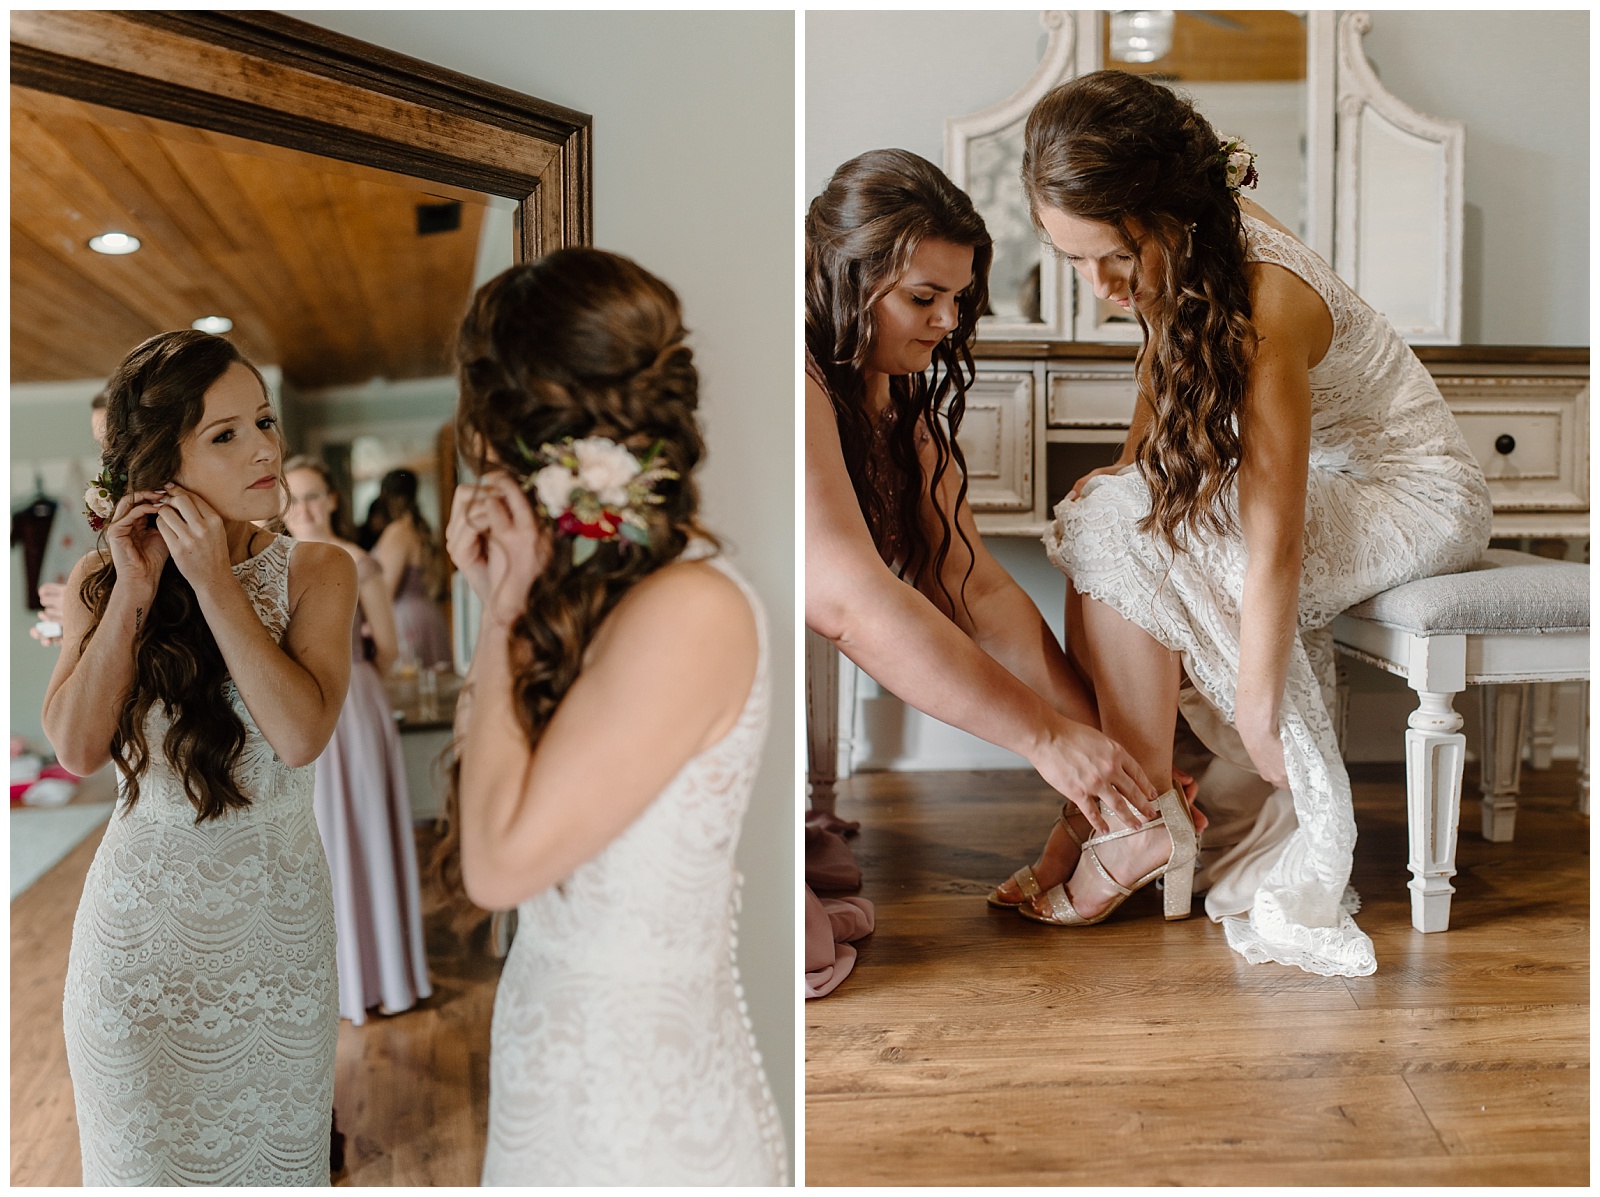 Bride putting on earrings and shoes with the help of her bridesmaids before her wedding.